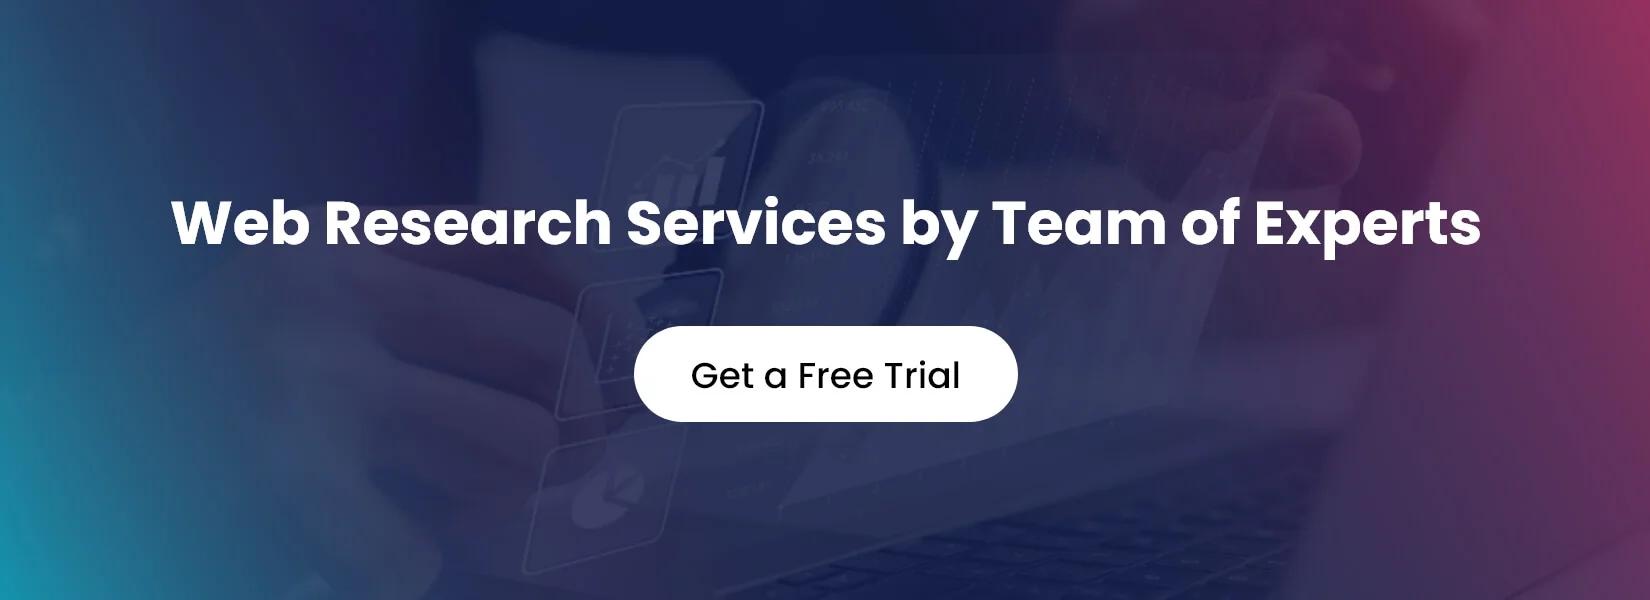 Web Research Services by Team of Experts